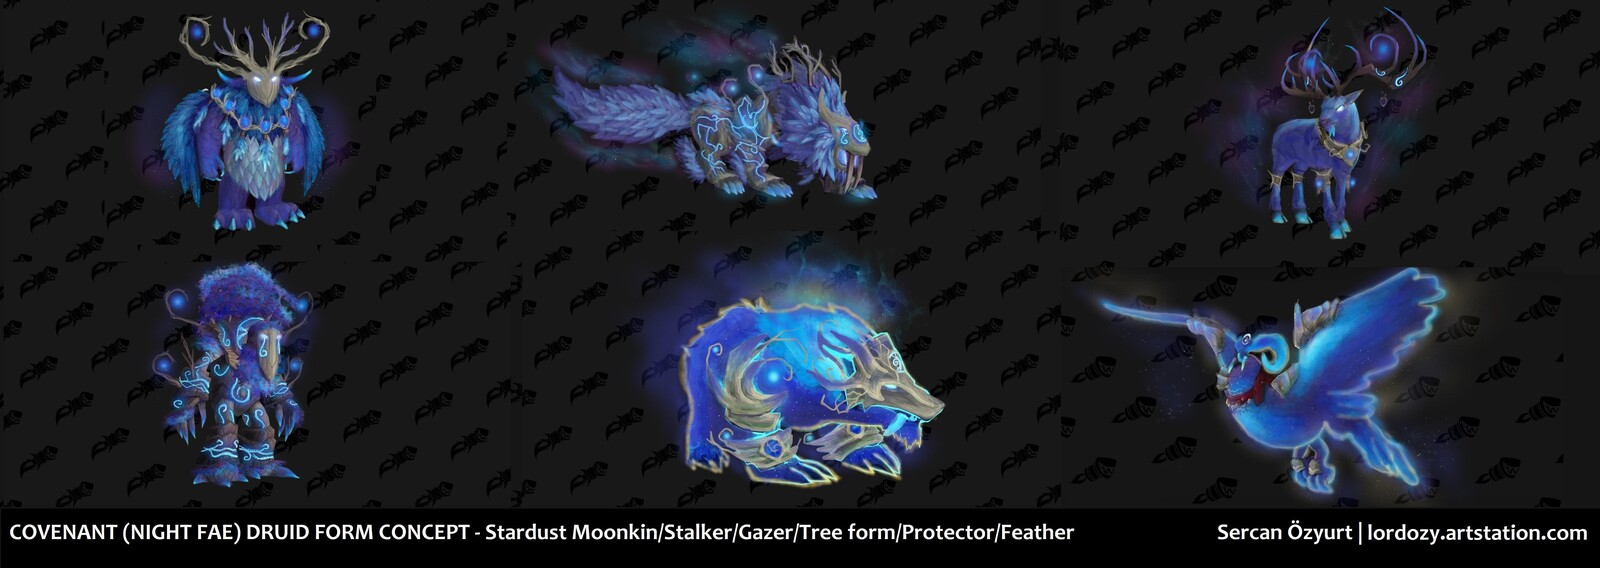 [Fan Concept] Covenant Druid Forms ''Night Fae'' - World of Warcraft